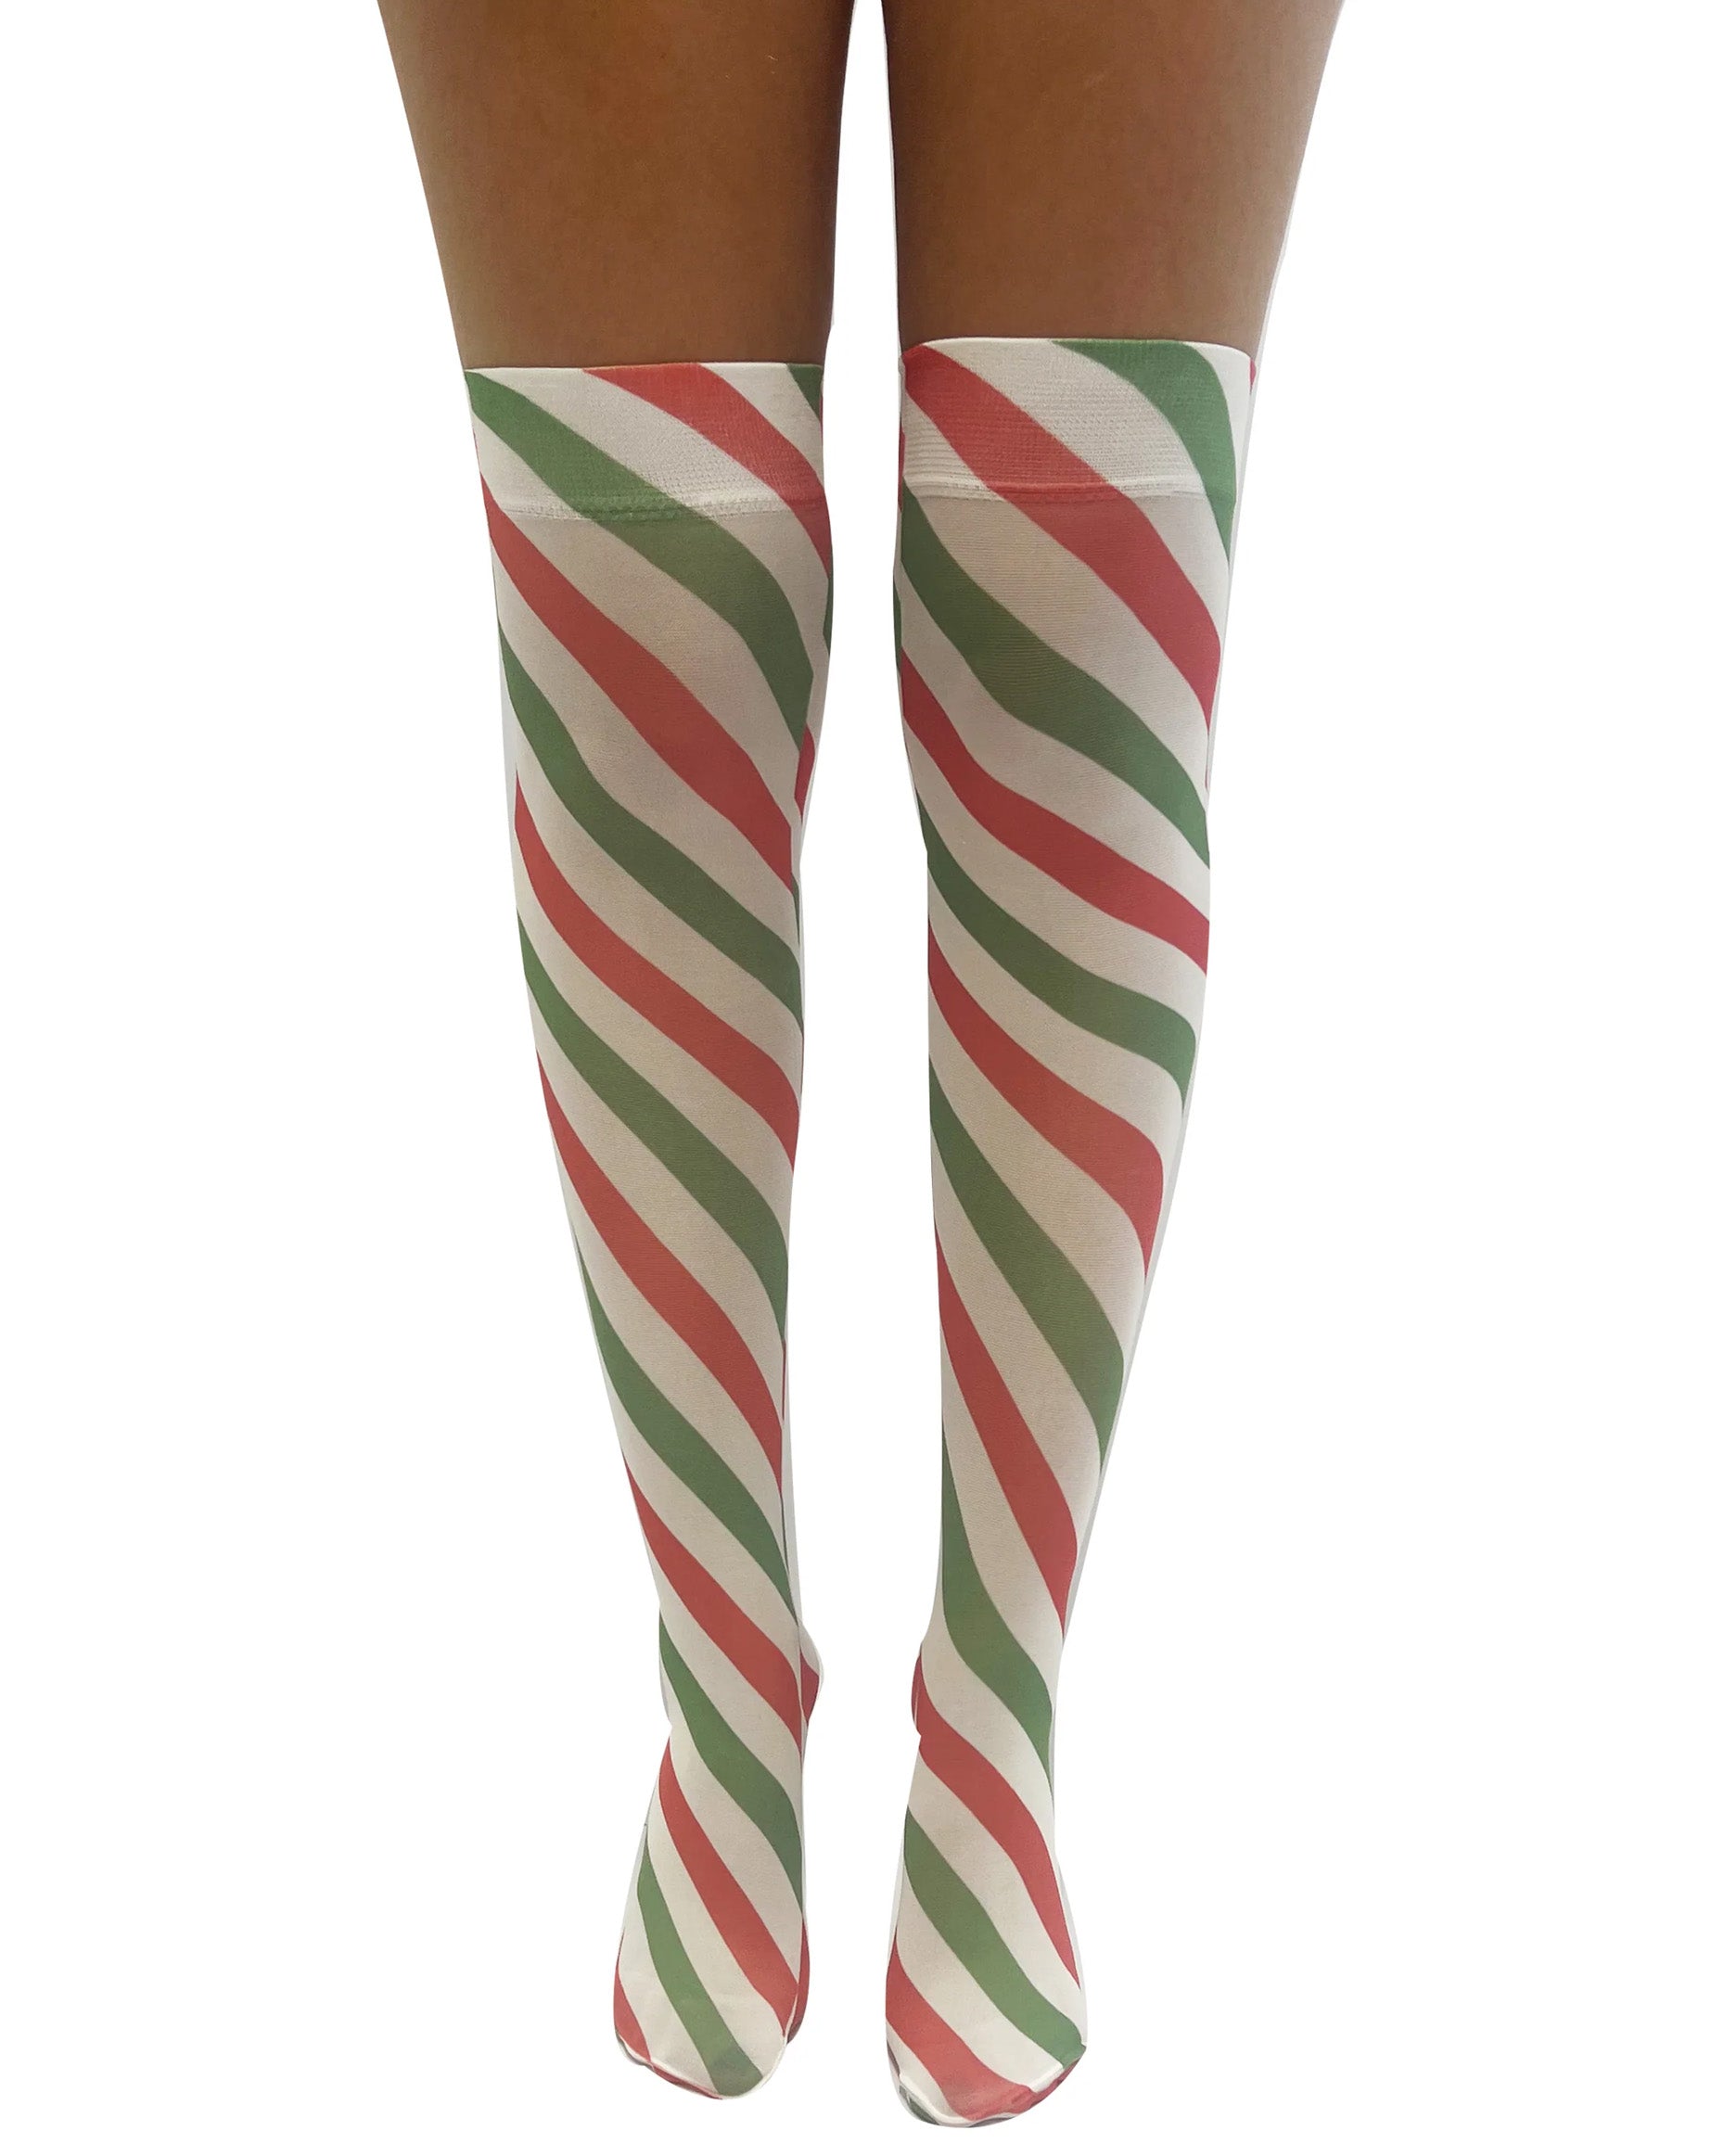 Pamela Mann Candy Cane Printed Over Knee Socks - White opaque over the knee socks with a green and red candy cane style stripe print.